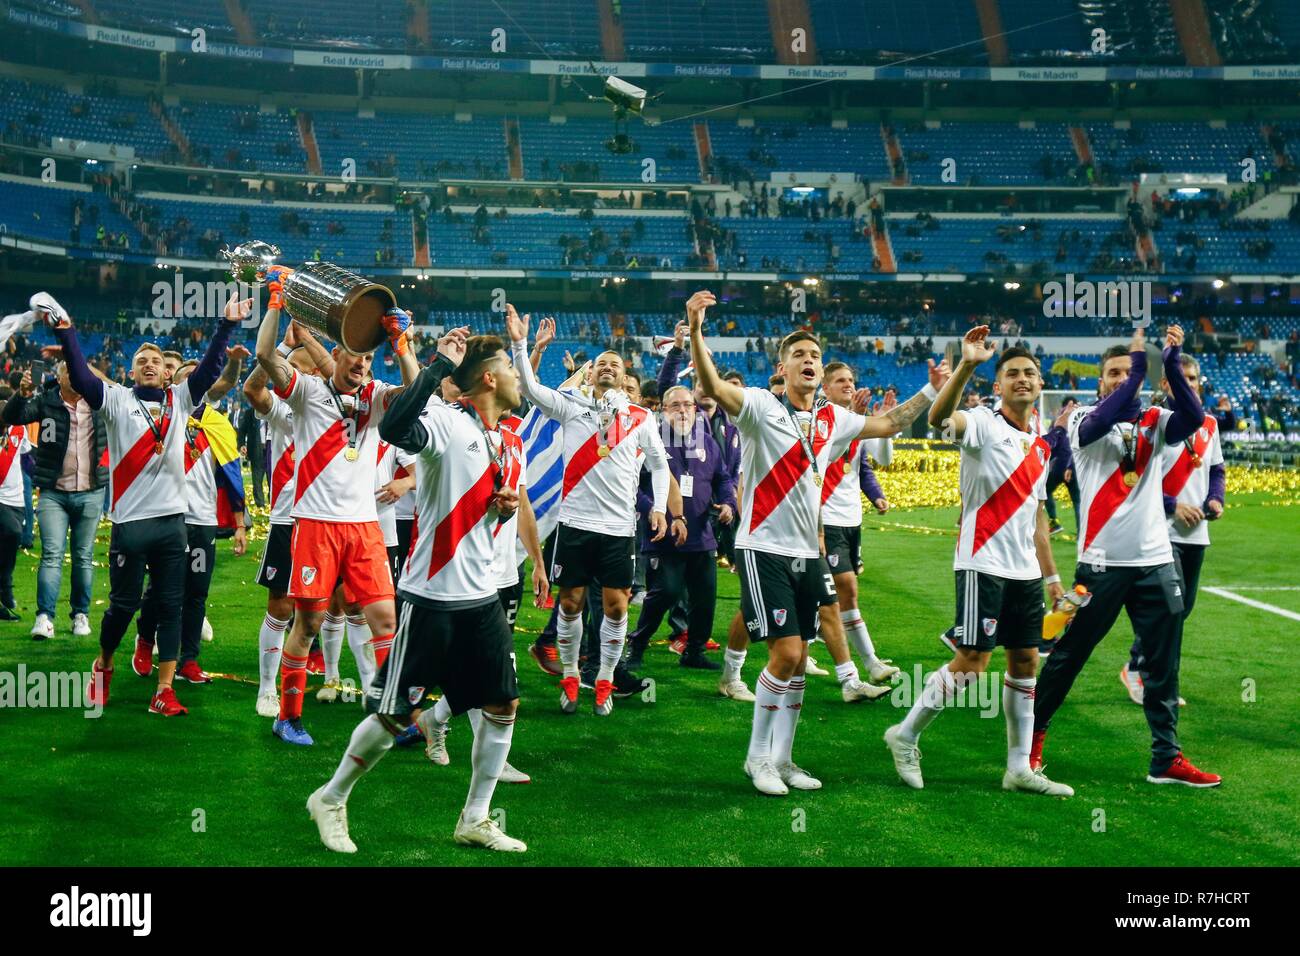 Players of River Plate celebrate after they won the Final of Copa CONMEBOL Libertadores 2018 at Estadio Santiago Bernabeu in Madrid. River Plate won the title of Copa Libertadores 2018 by beating Boca Juniors. (Final score River Plate 3-1 Boca Juniors) Stock Photo